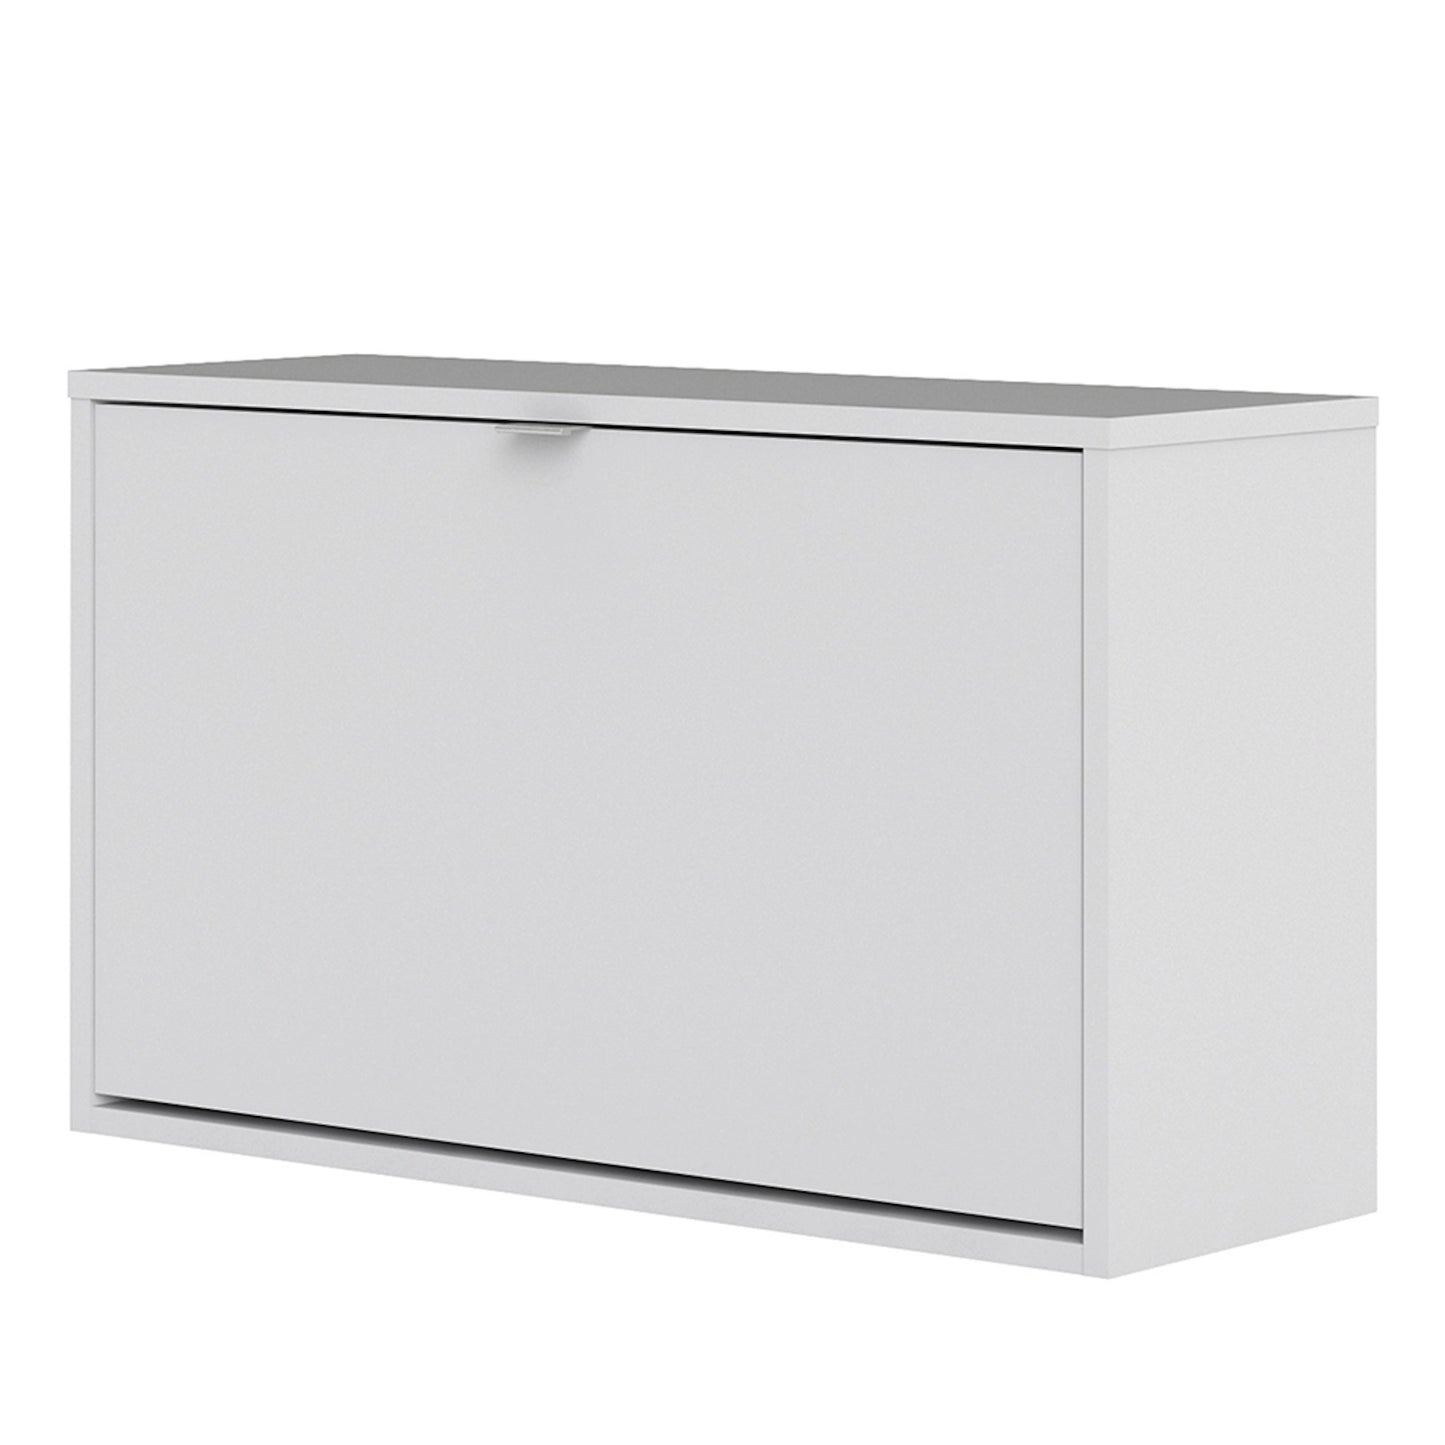 Furniture To Go Shoes Shoe Cabinet W. 1 Tilting Door & 2 Layers in White